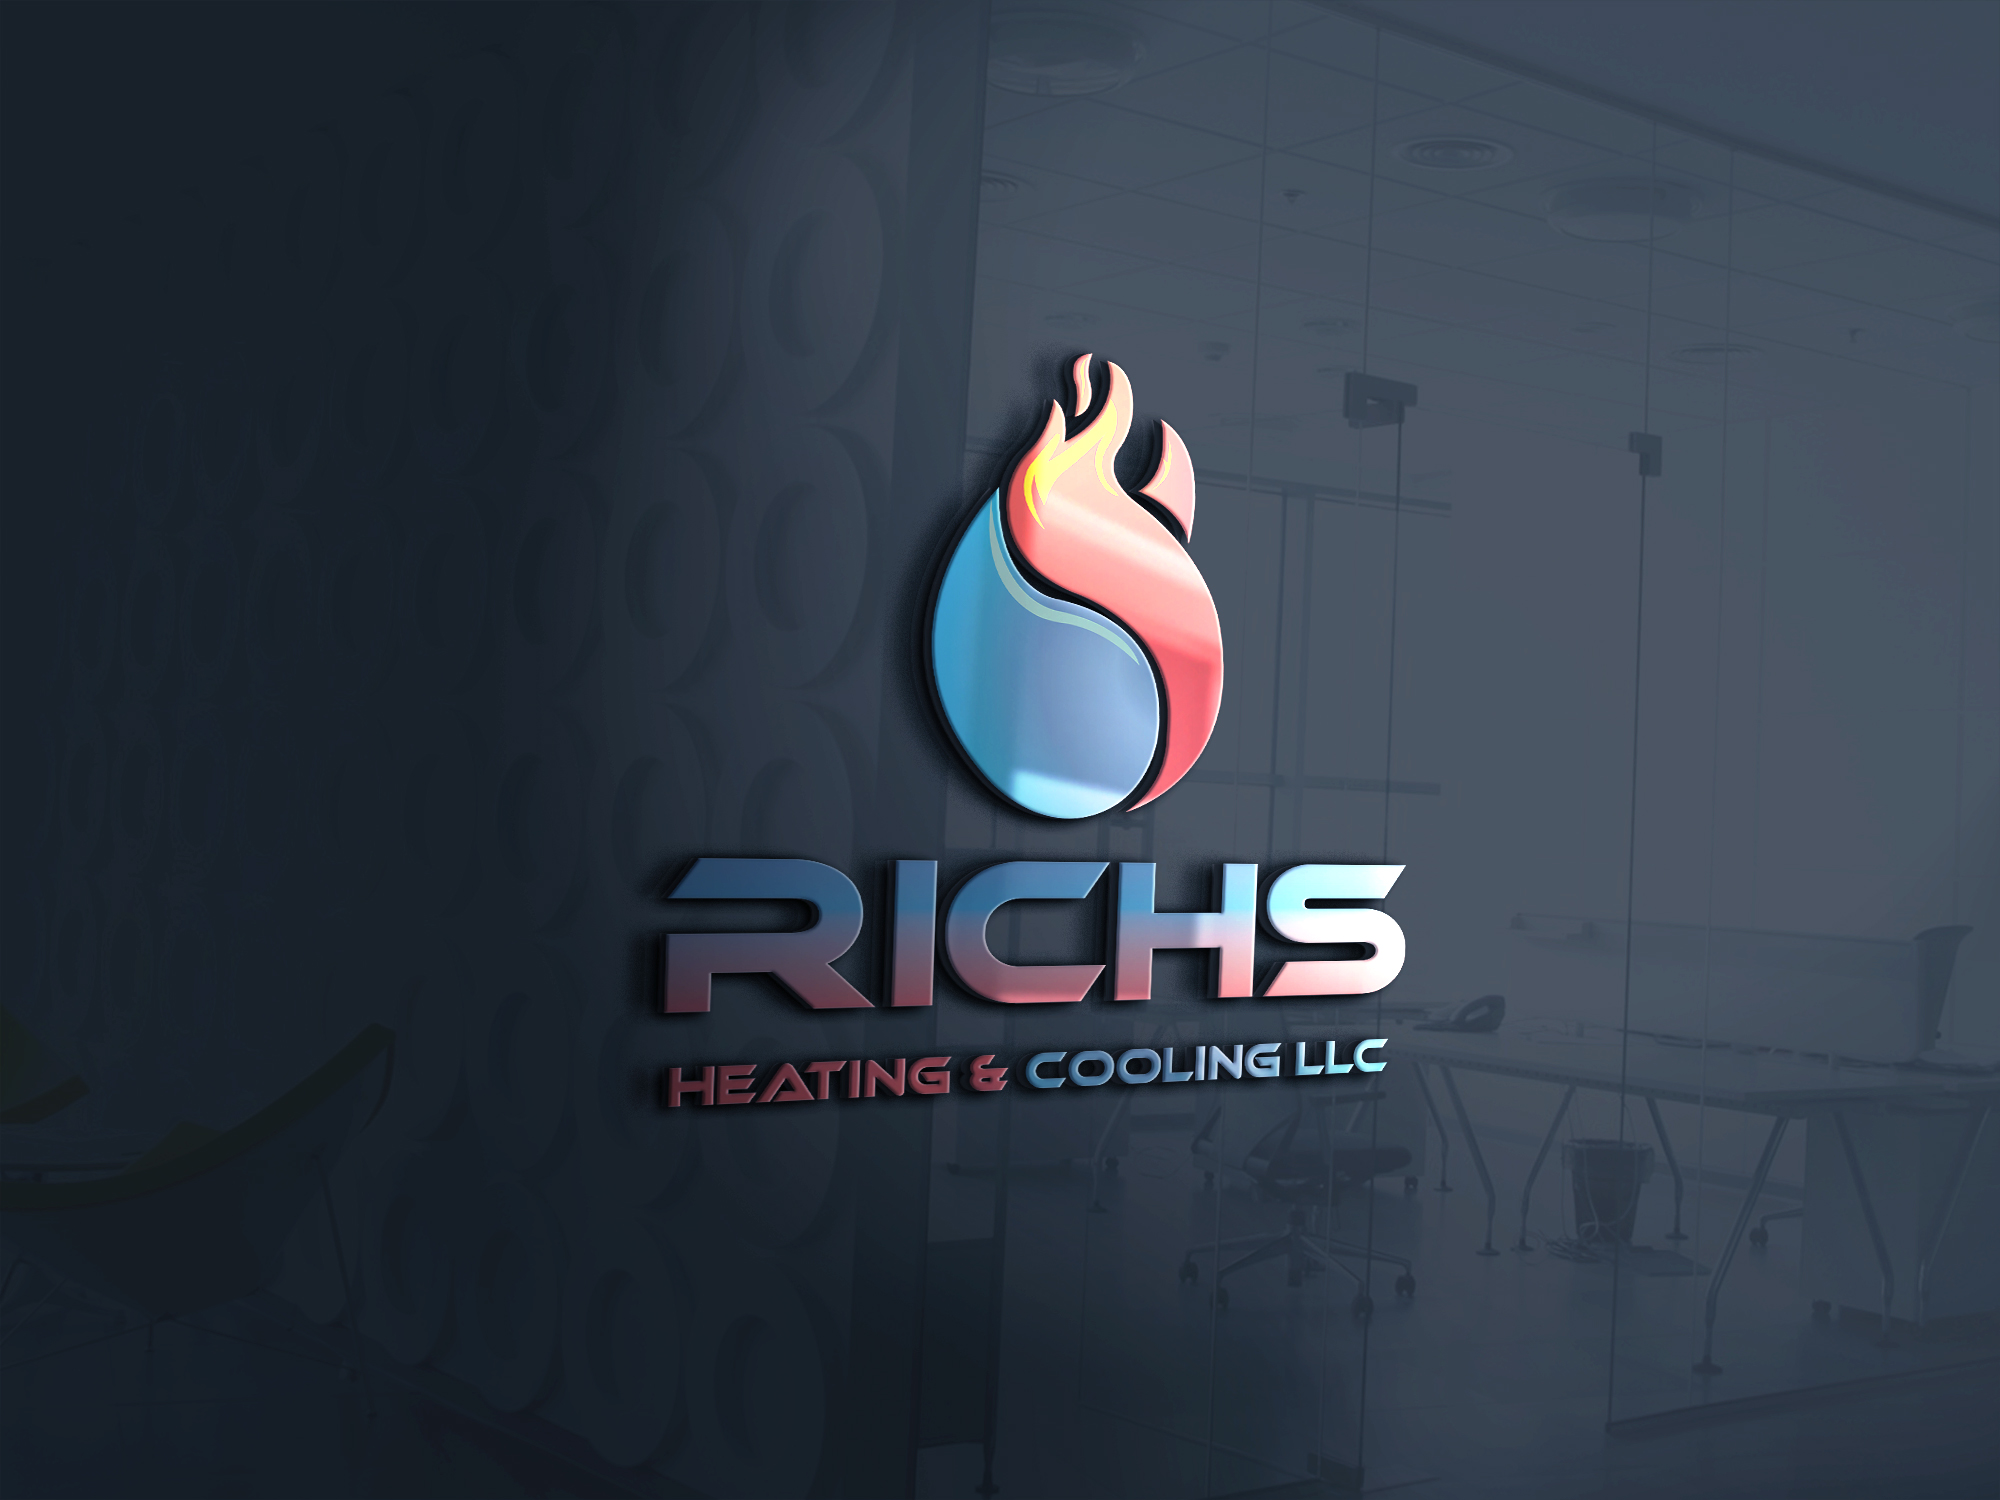 Richs Heating and Cooling Logo